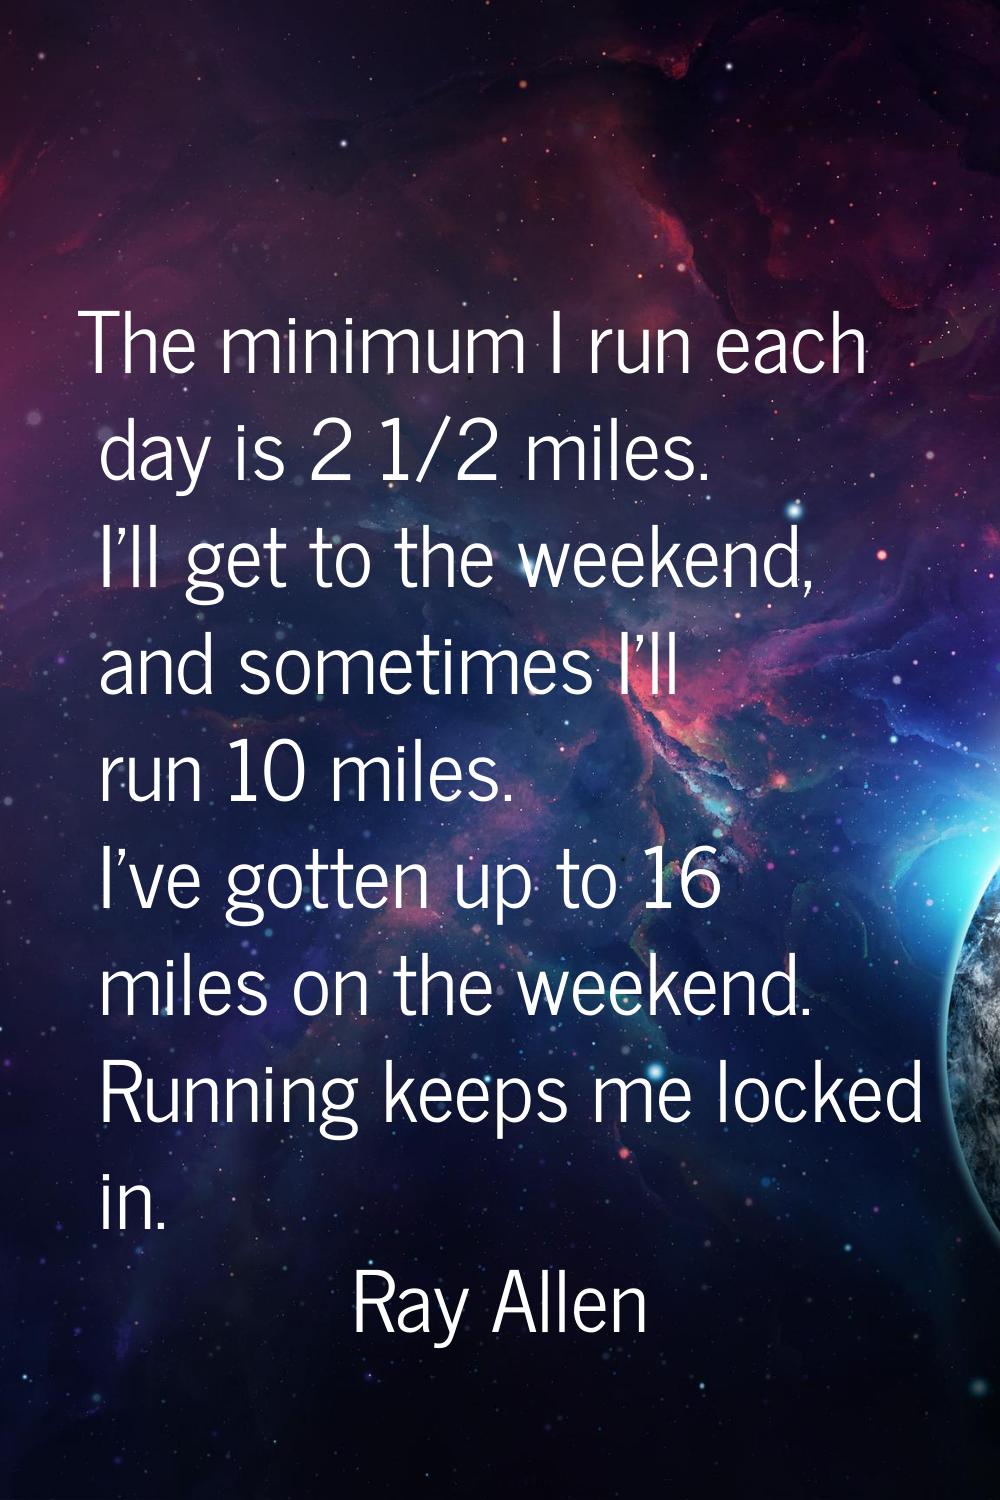 The minimum I run each day is 2 1/2 miles. I'll get to the weekend, and sometimes I'll run 10 miles